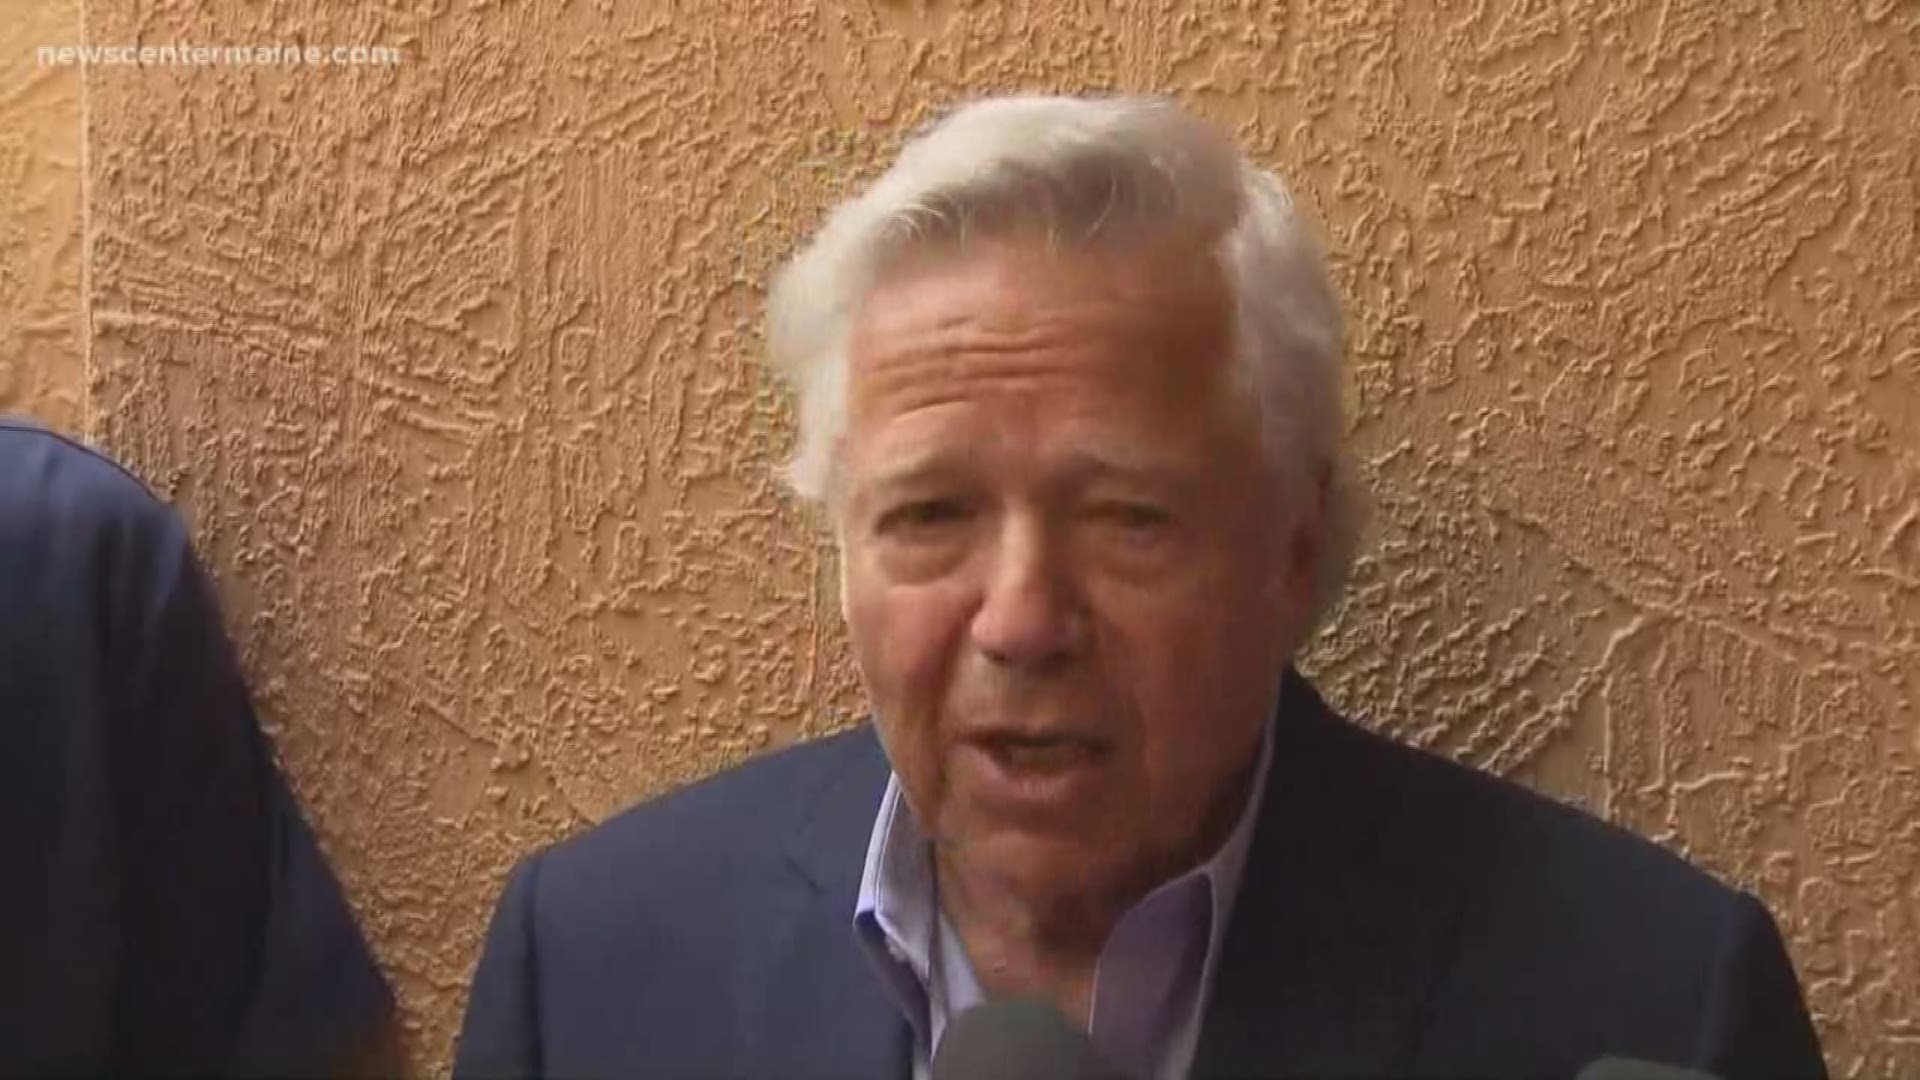 According to new police documents, video reveals Robert Kraft was at a day spa soliciting prostitution the morning of the Patriots AFC Championship game.